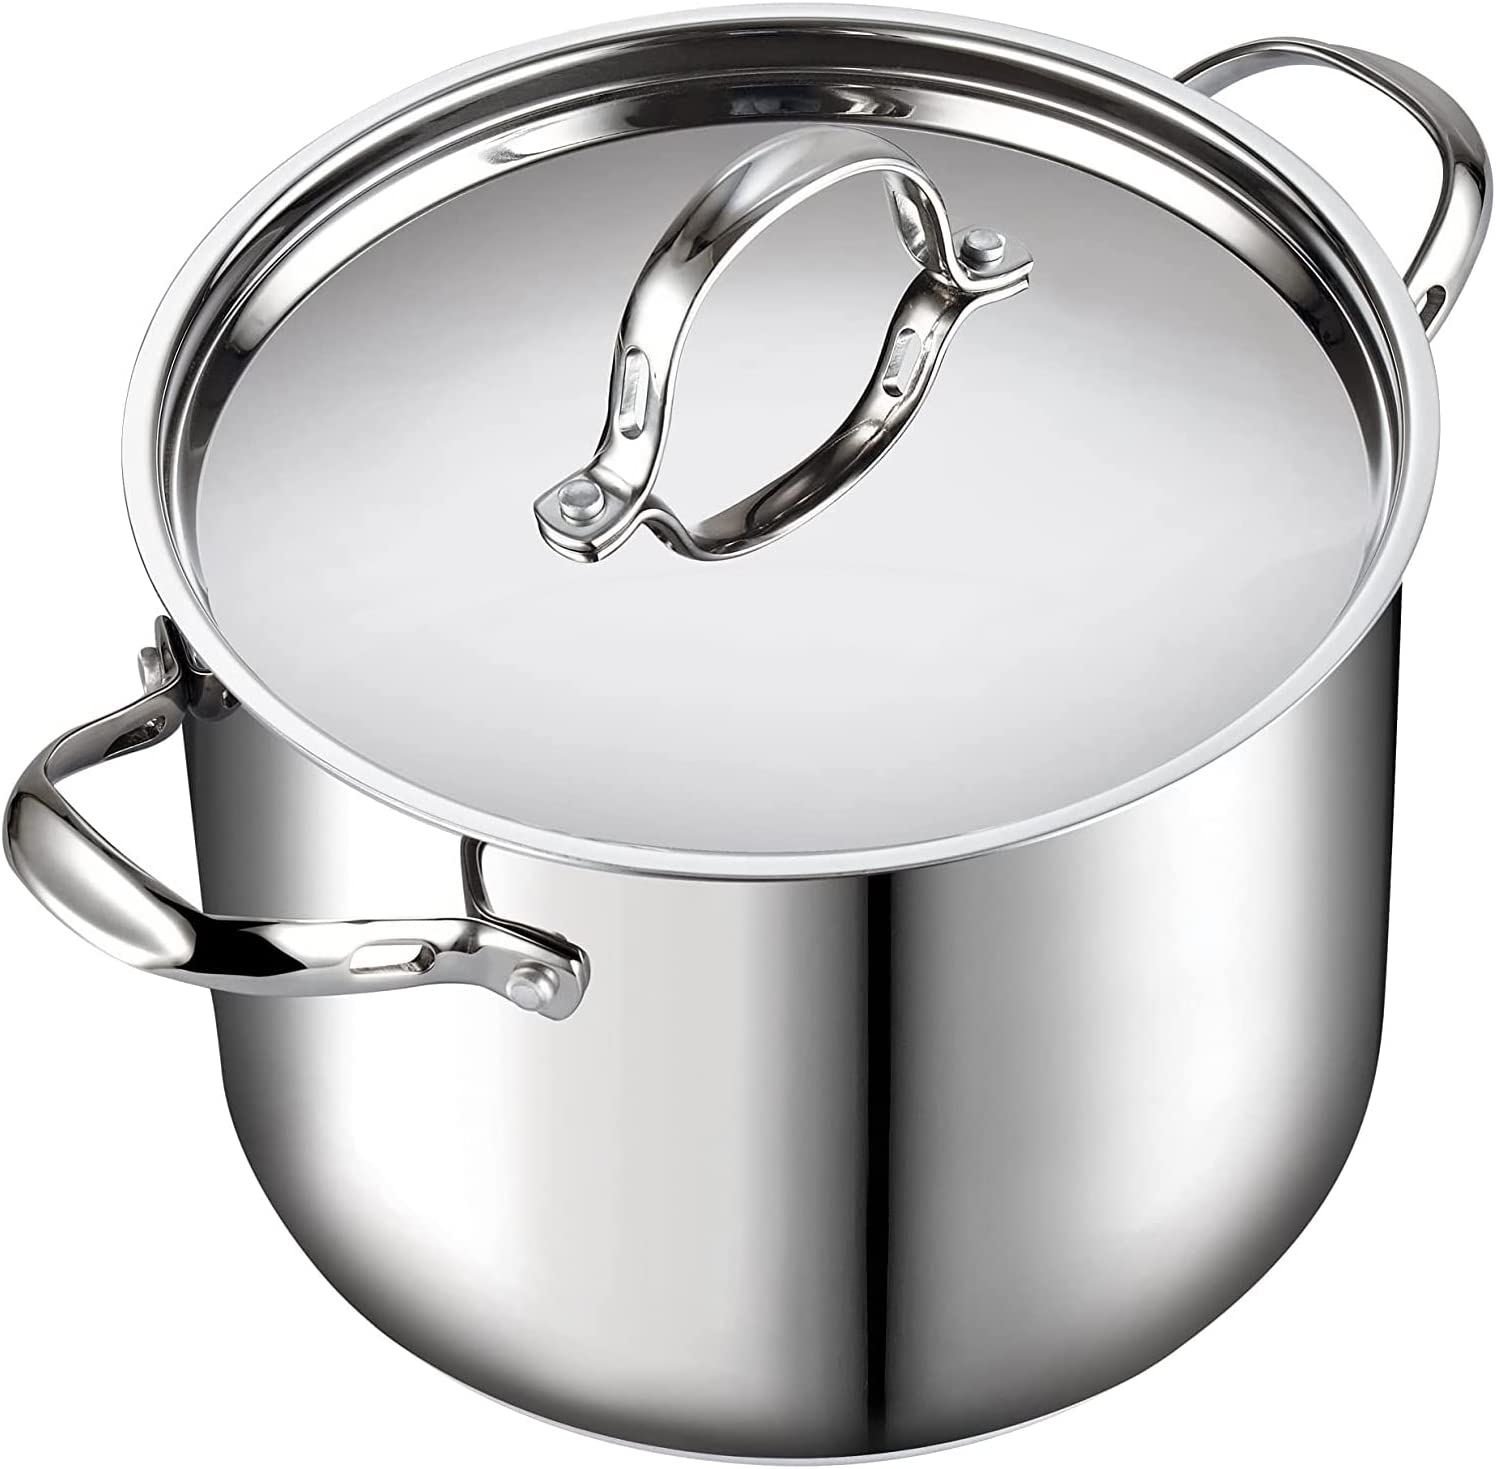 Cooks Standard 6-Quart Stainless Steel Classic Deep Cooking